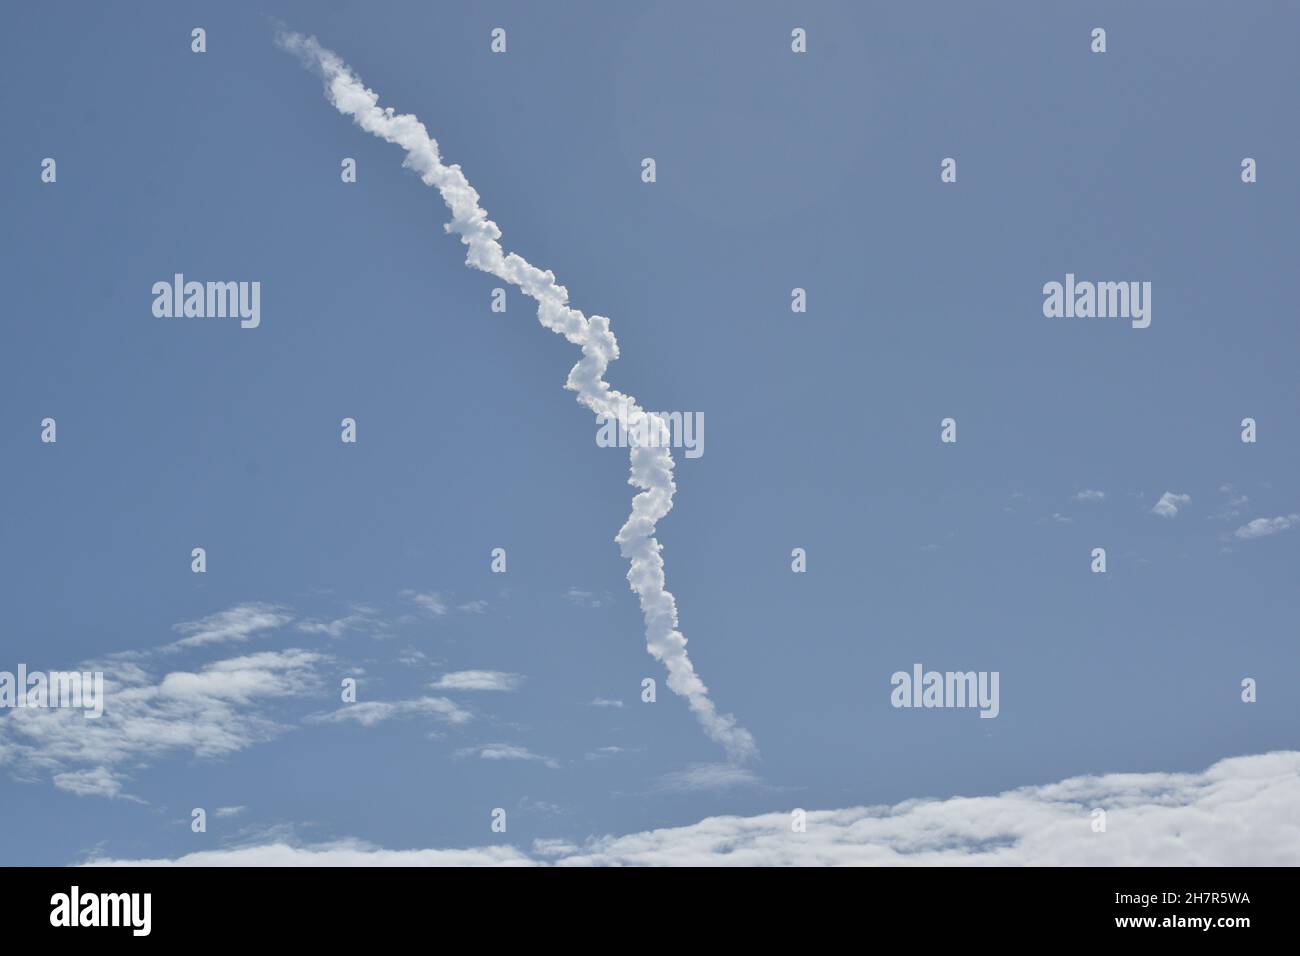 The long squiggly contrail remains after a successful launch of SpaceX's Falcon 9 rocket. Stock Photo